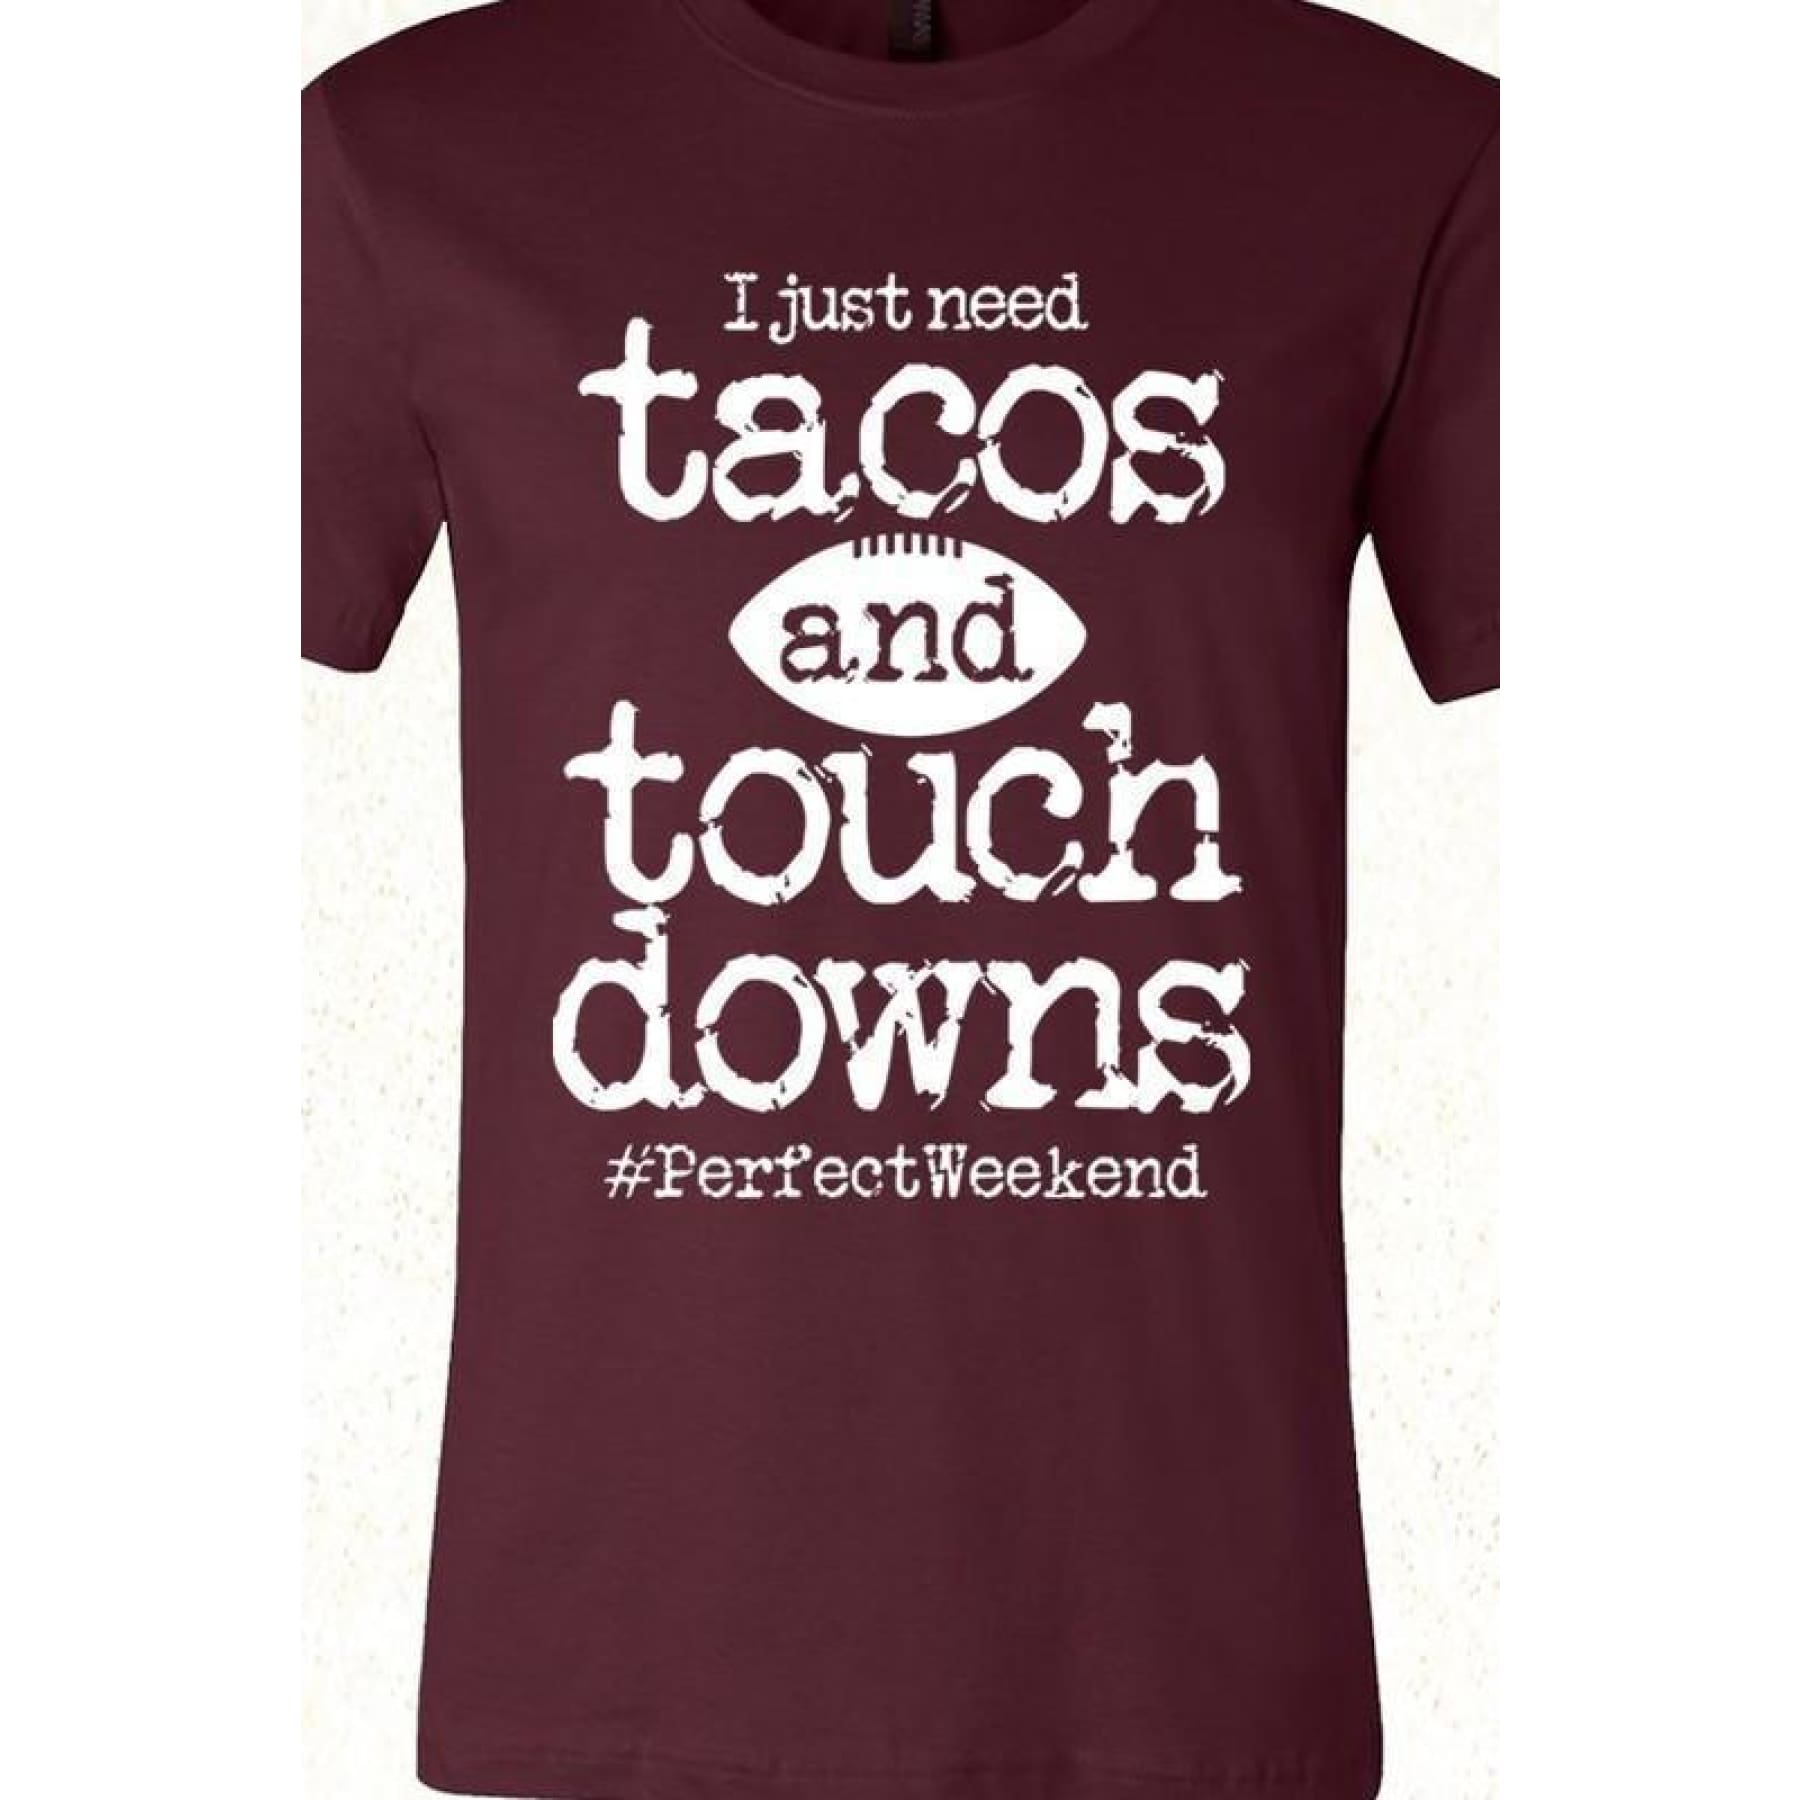 Tacos and Touchdowns Tee  (2 color choices),Graphic Tee - Dirt Road Divas Boutique